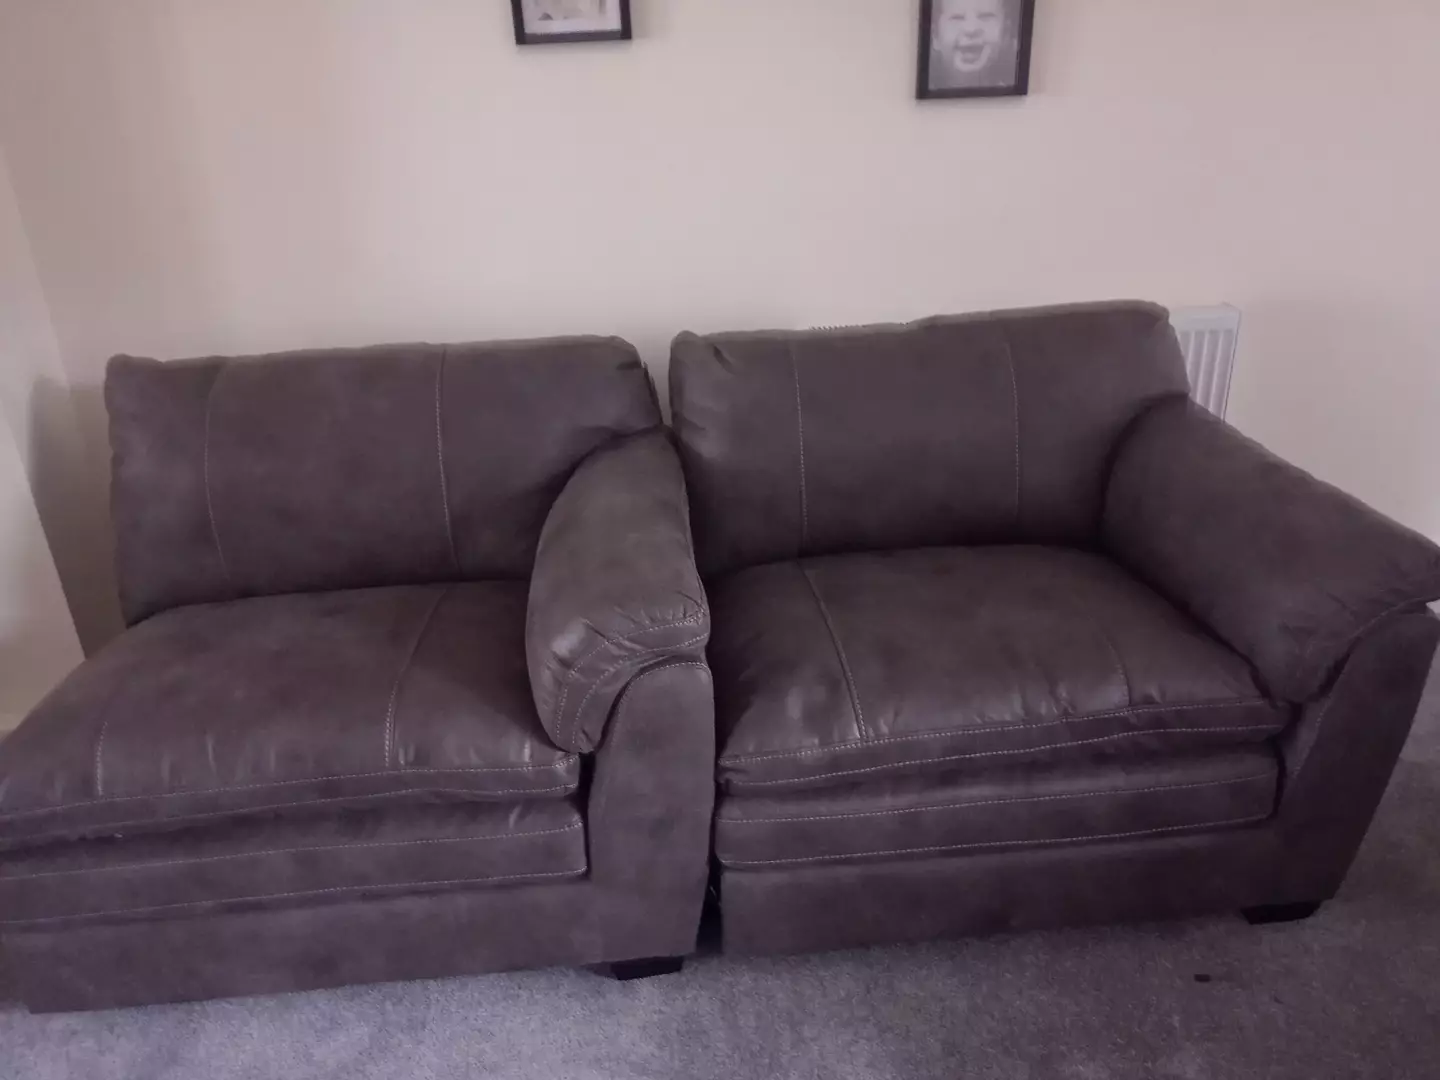 Liam received a sofa with two right halves (